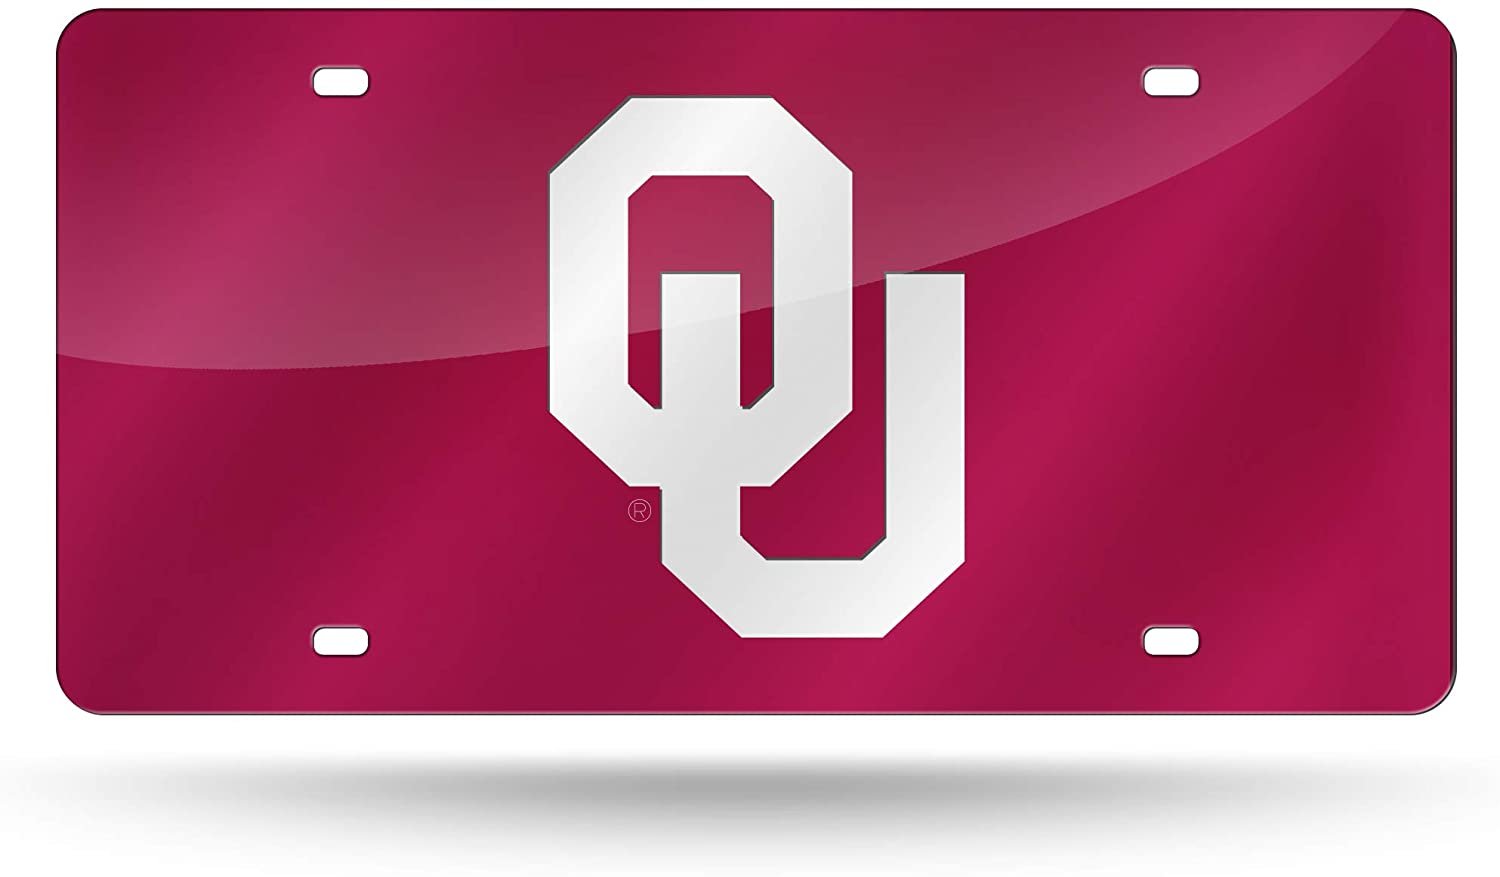 University of Oklahoma Sooners Premium Laser Cut Tag License Plate, Mirrored Acrylic Inlaid, Red, 12x6 Inch